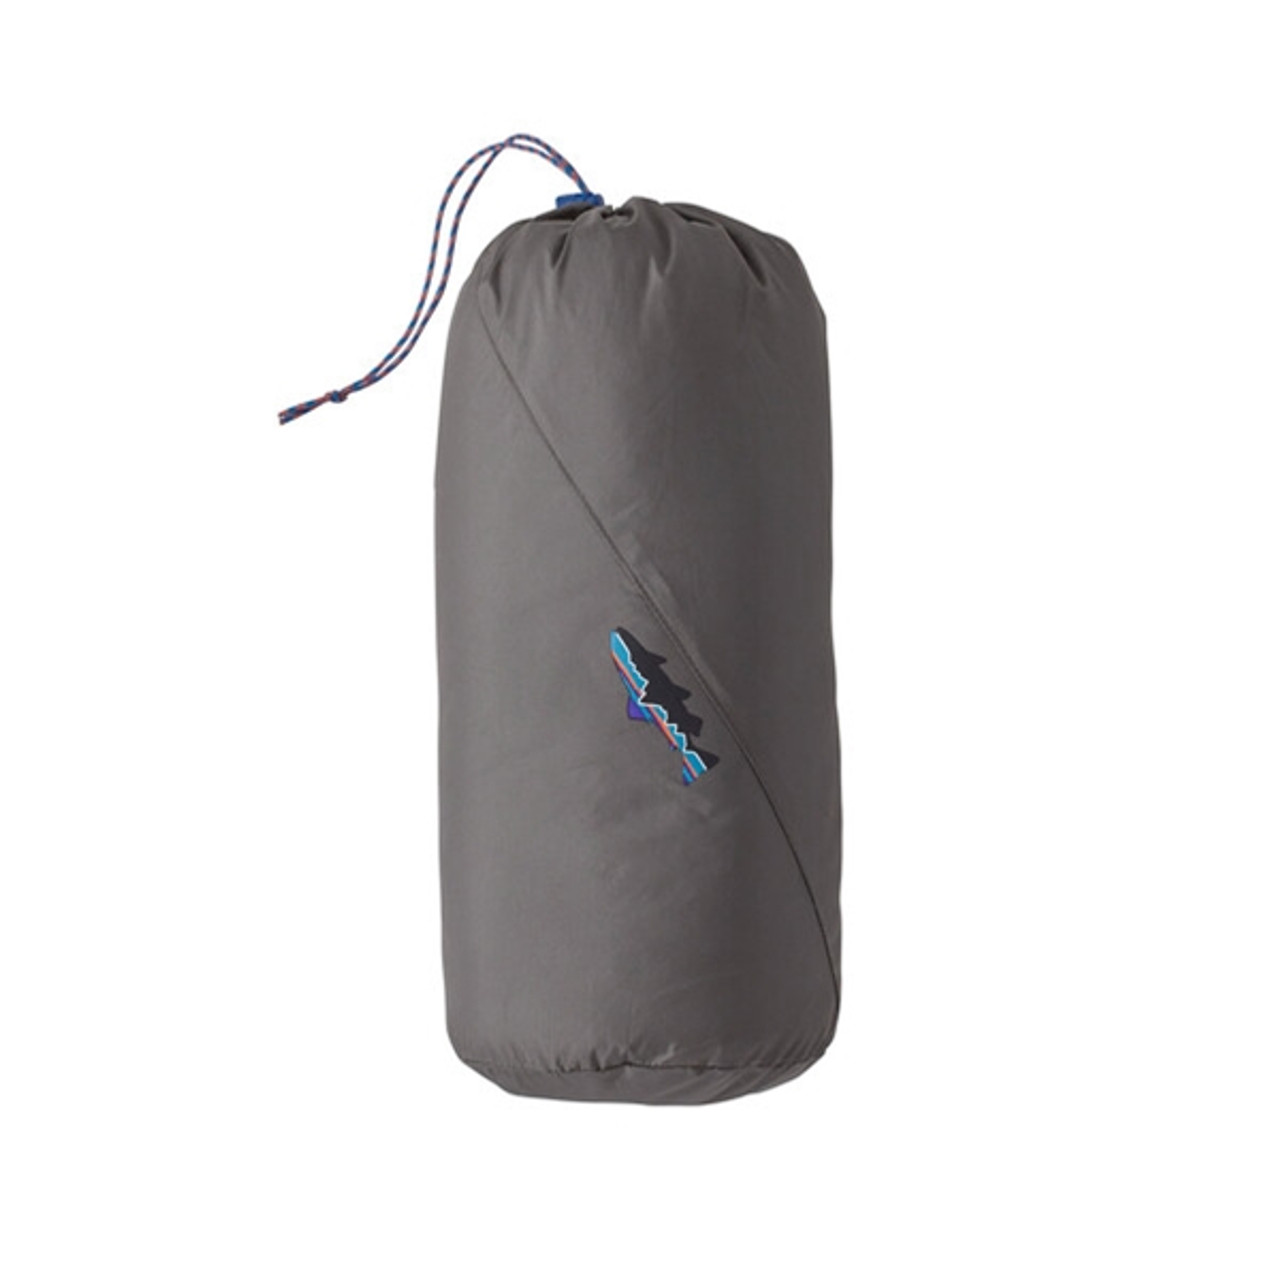 https://cdn11.bigcommerce.com/s-gxthzko3a6/images/stencil/1280x1280/products/1552/56793/patagonia-mens-swiftcurrent-ultralight-waders-sack__80731.1705610904.jpg?c=1